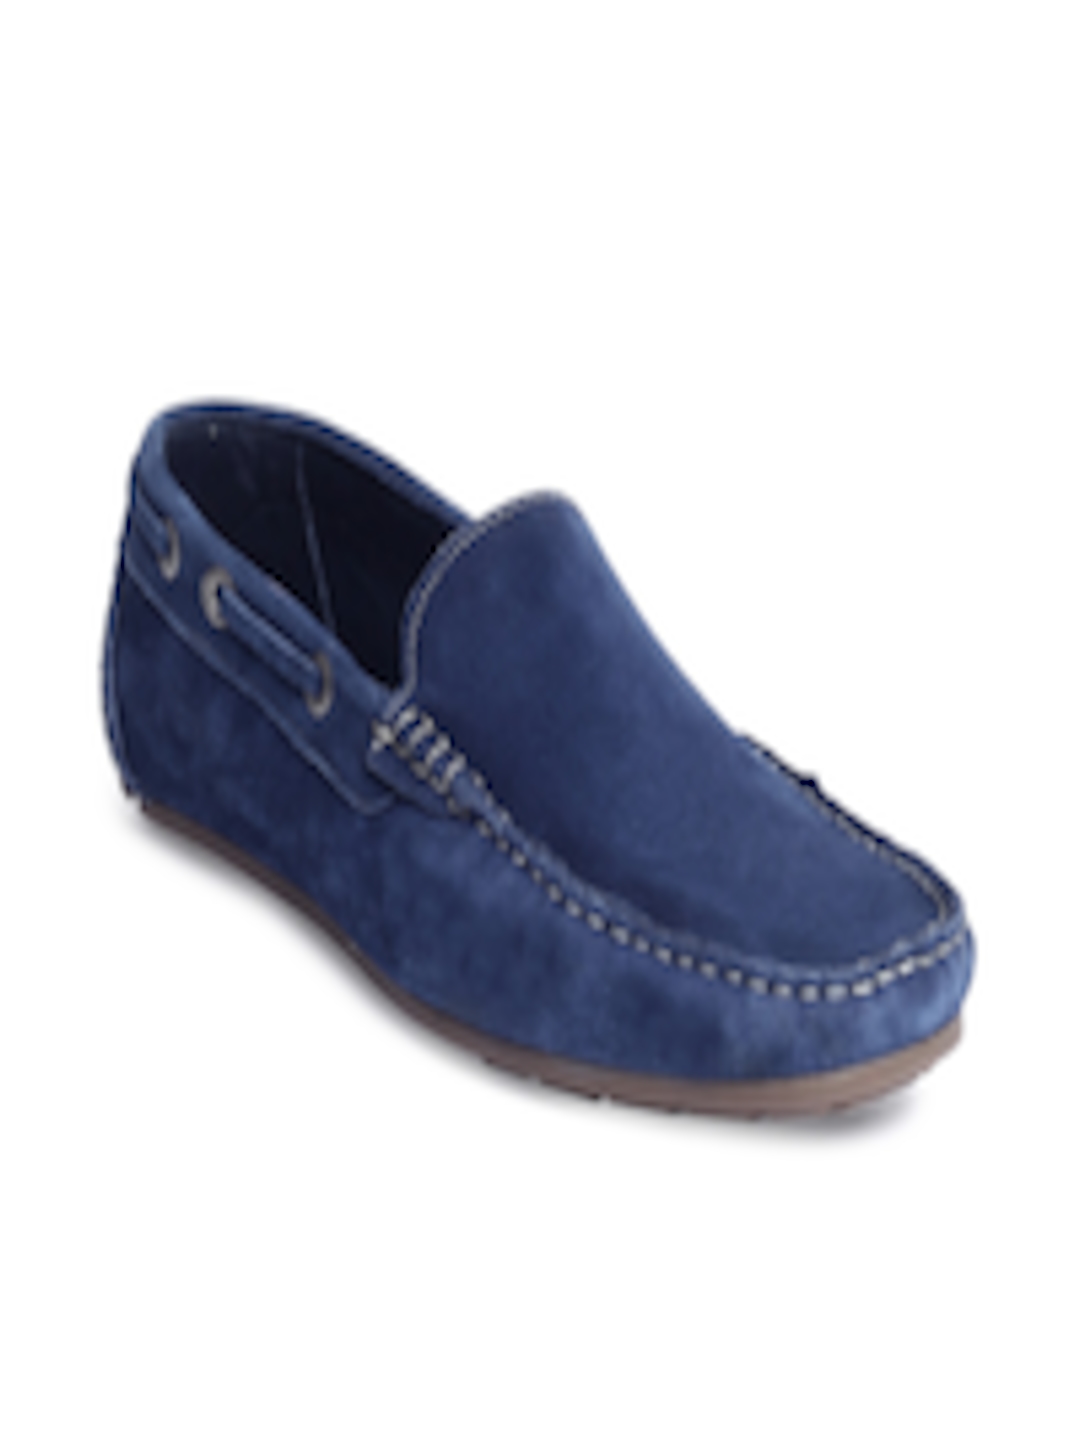 Buy Alberto Torresi Men Leather Shoes - Casual Shoes for Men 67988 | Myntra